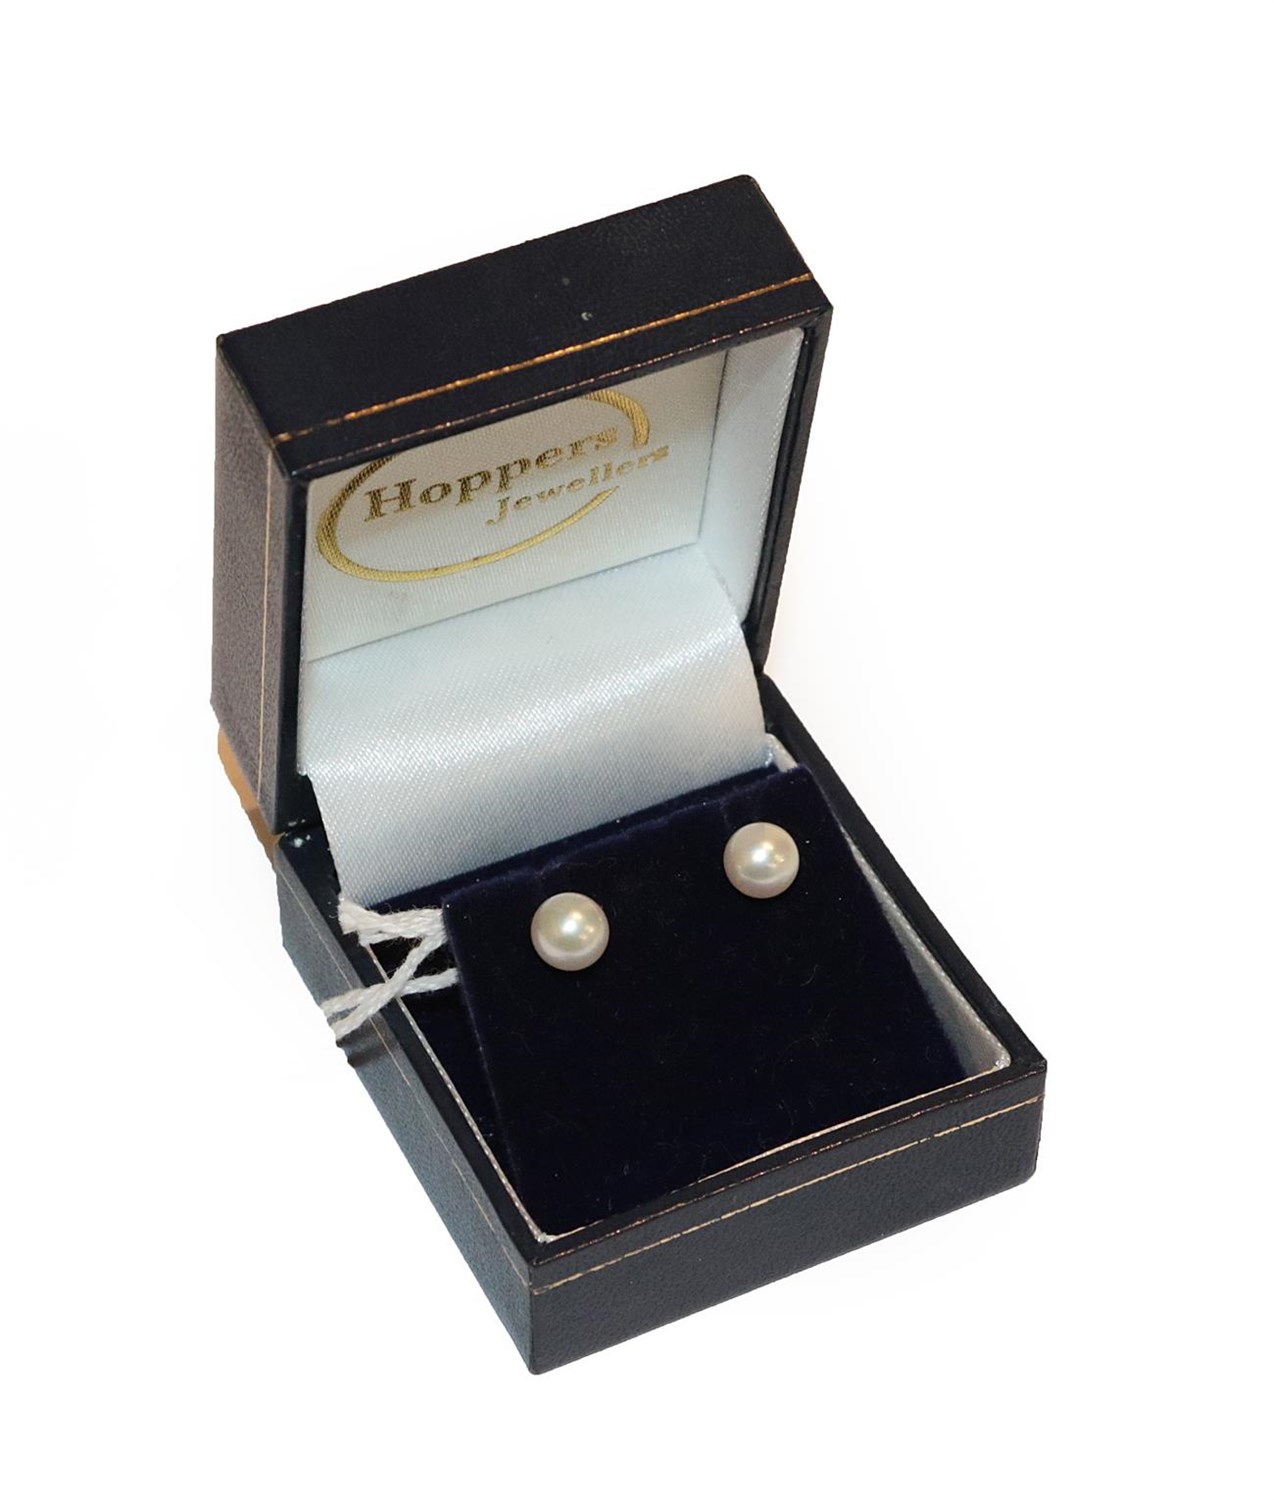 Lot 241 - A pair of cultured pearl earrings, by Mikimoto, the cultured pearls measuring 6.35mm diameter, with